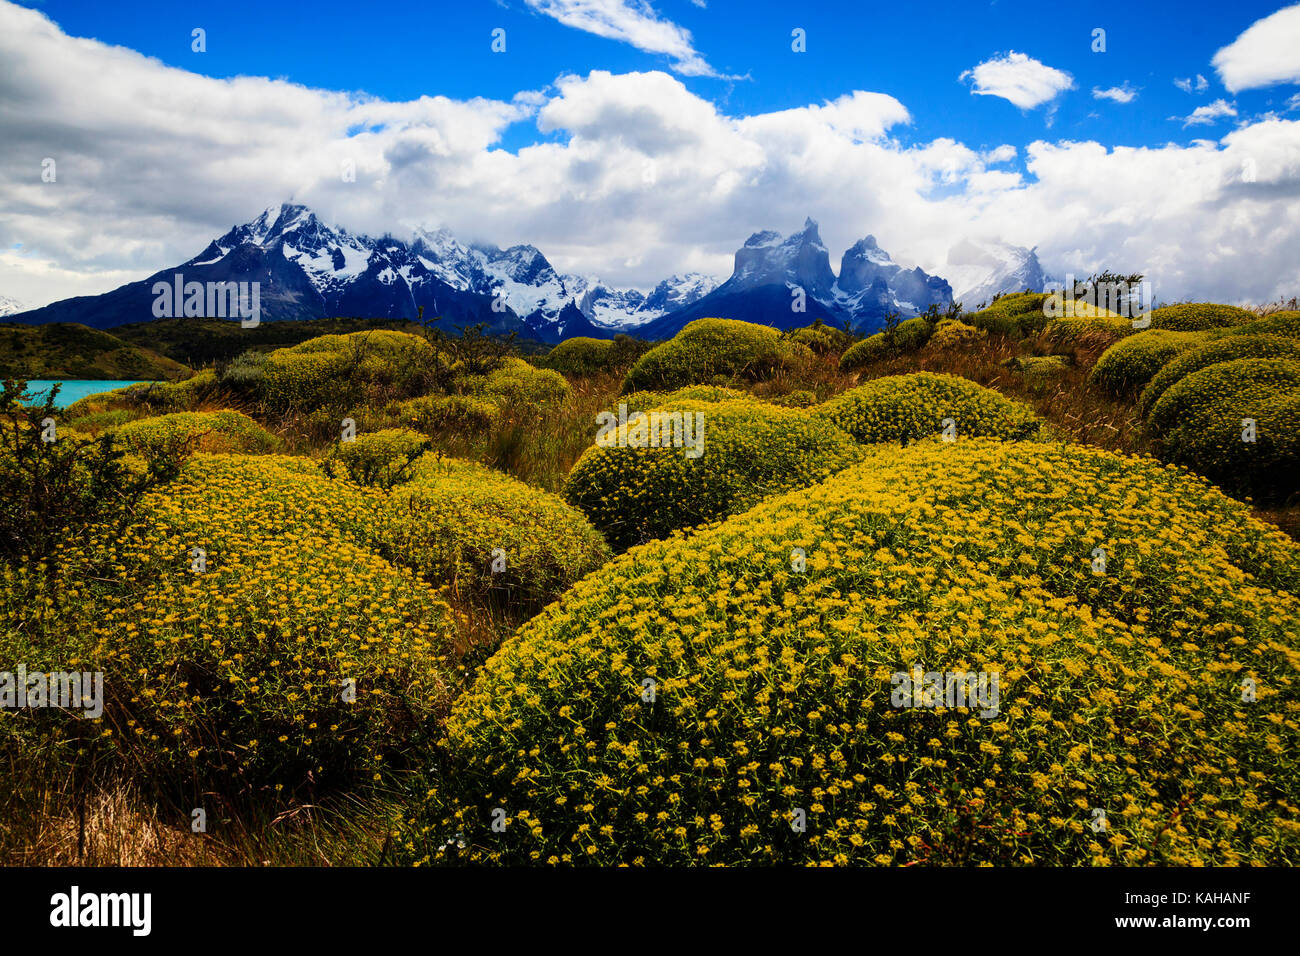 Cuernos del Paine massif with flowering Neneo plants (Mulinum spinosa) at the front, Torres del Paine National Park, Chile, South America Stock Photo